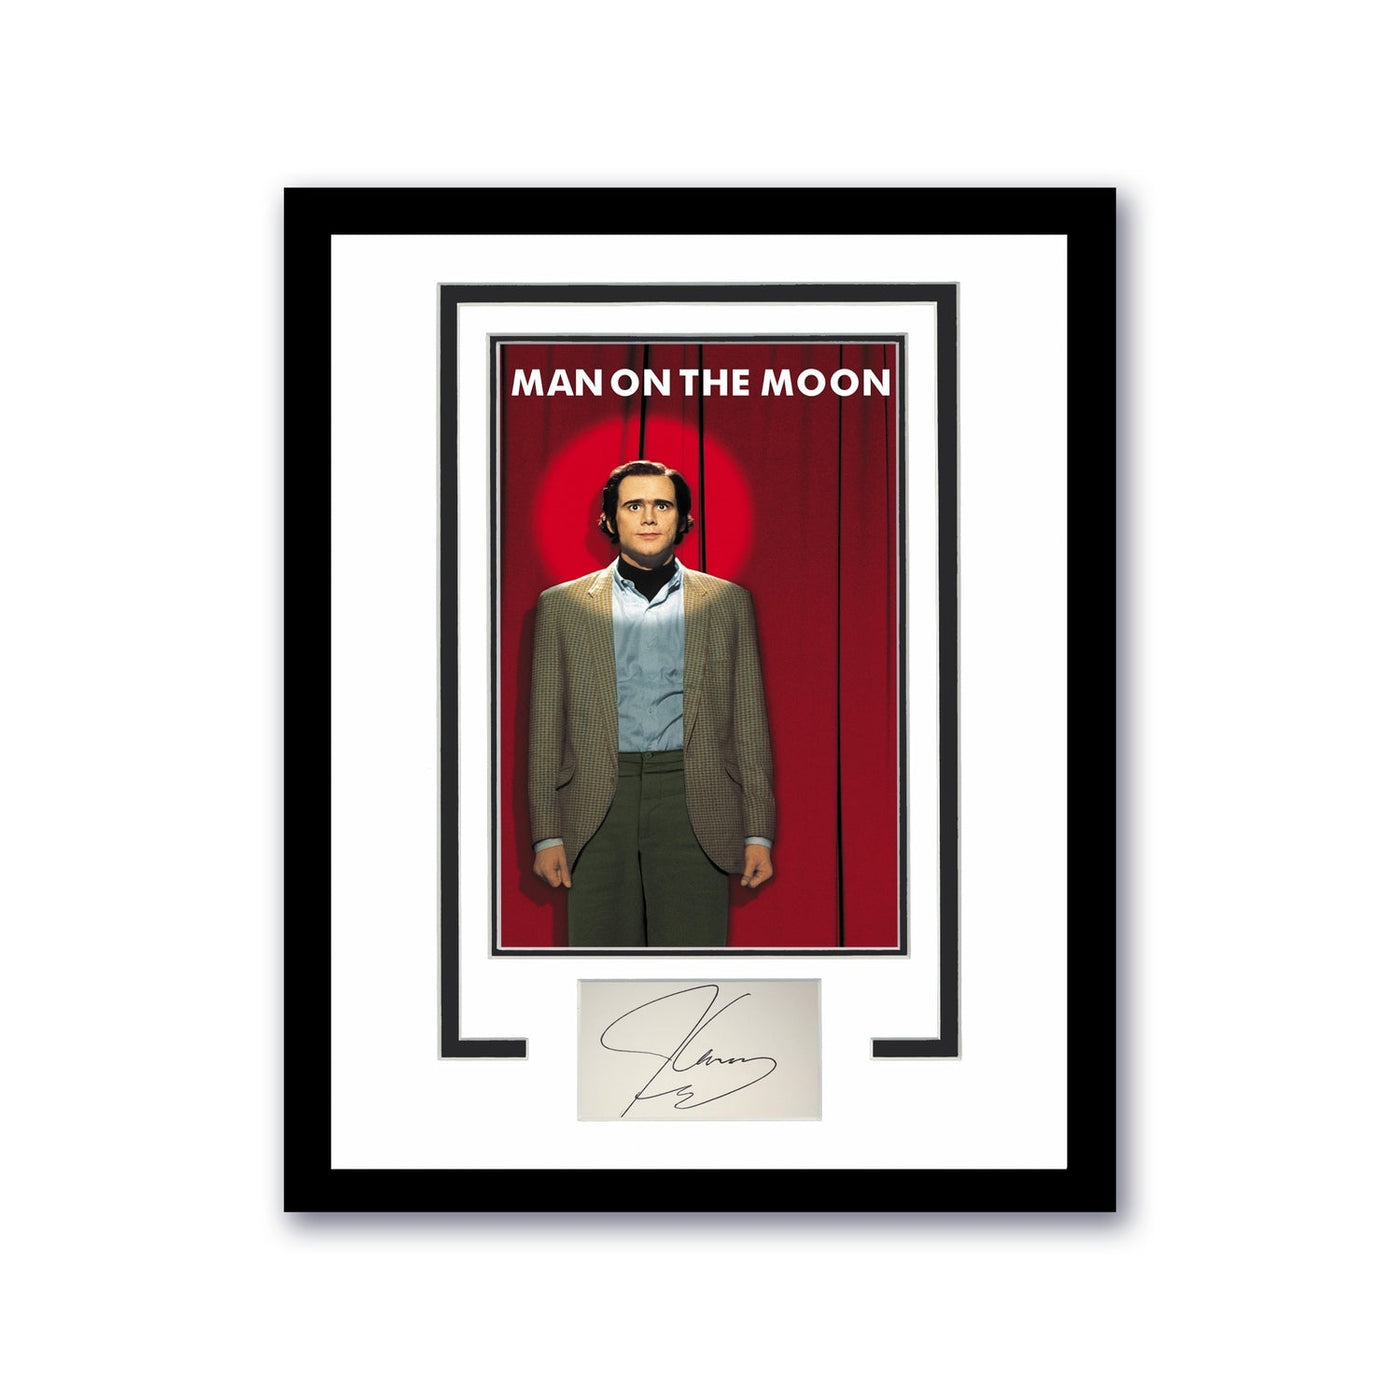 Man On The Moon Jim Carrey Signed 11x14 Framed Poster Photo Andy Kaufman ACOA